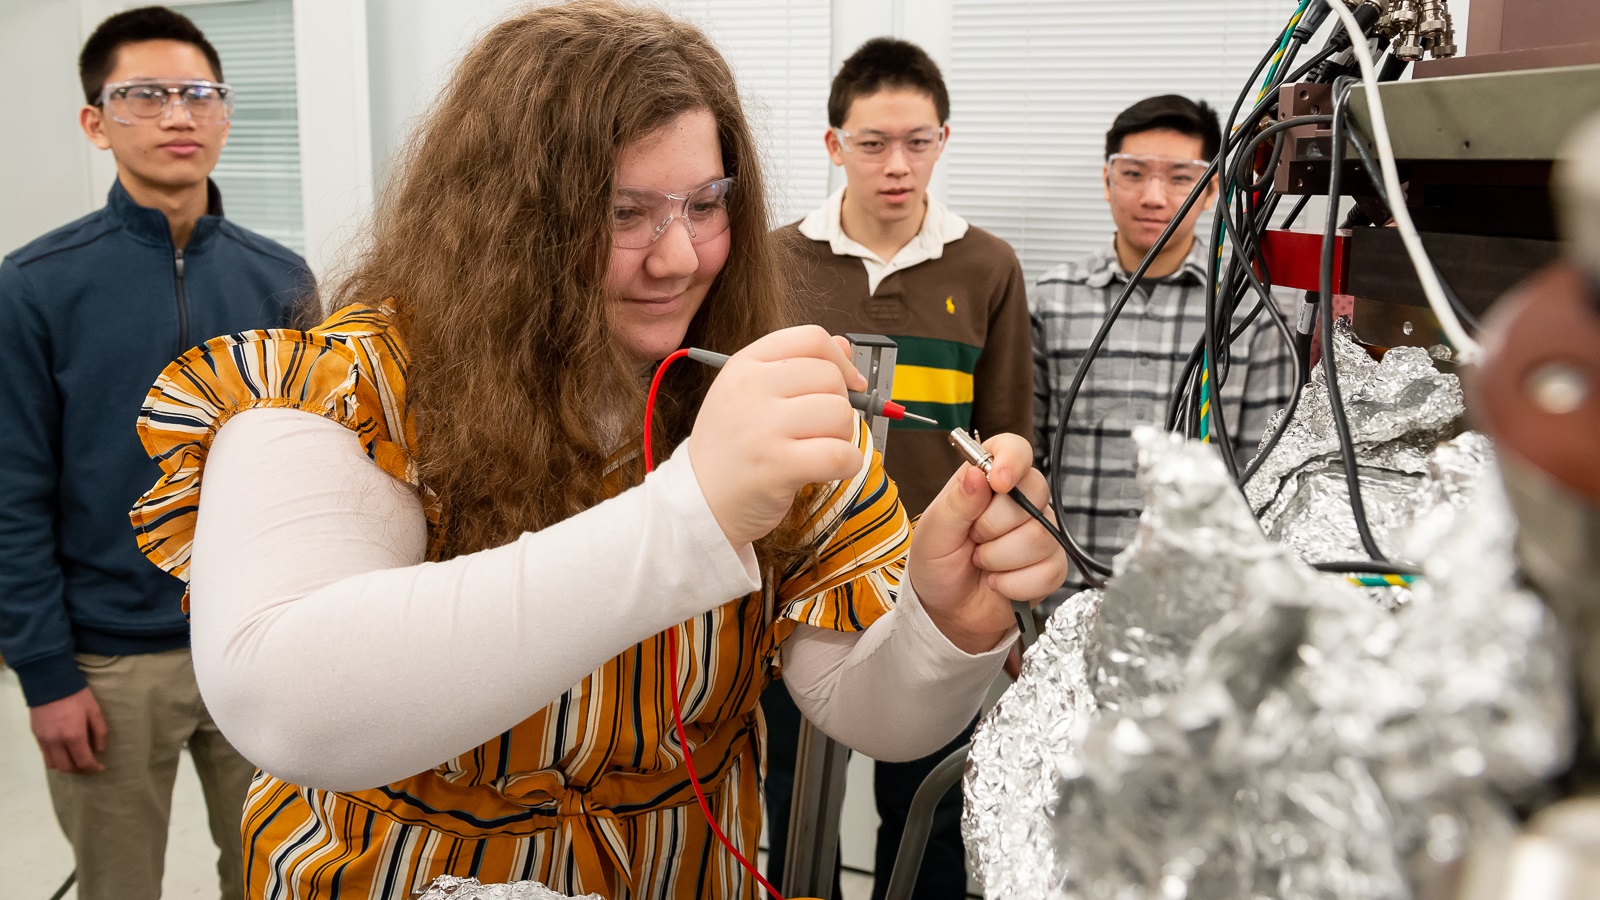 While her classmates look on, a student from Naperville Central High School works on technology at the APS in February 2020 as part of the ESRP. Students work with scientists to design and conduct experiments at Argonne’s research facilities. (Image by Mark Lopez / Argonne National Laboratory.)